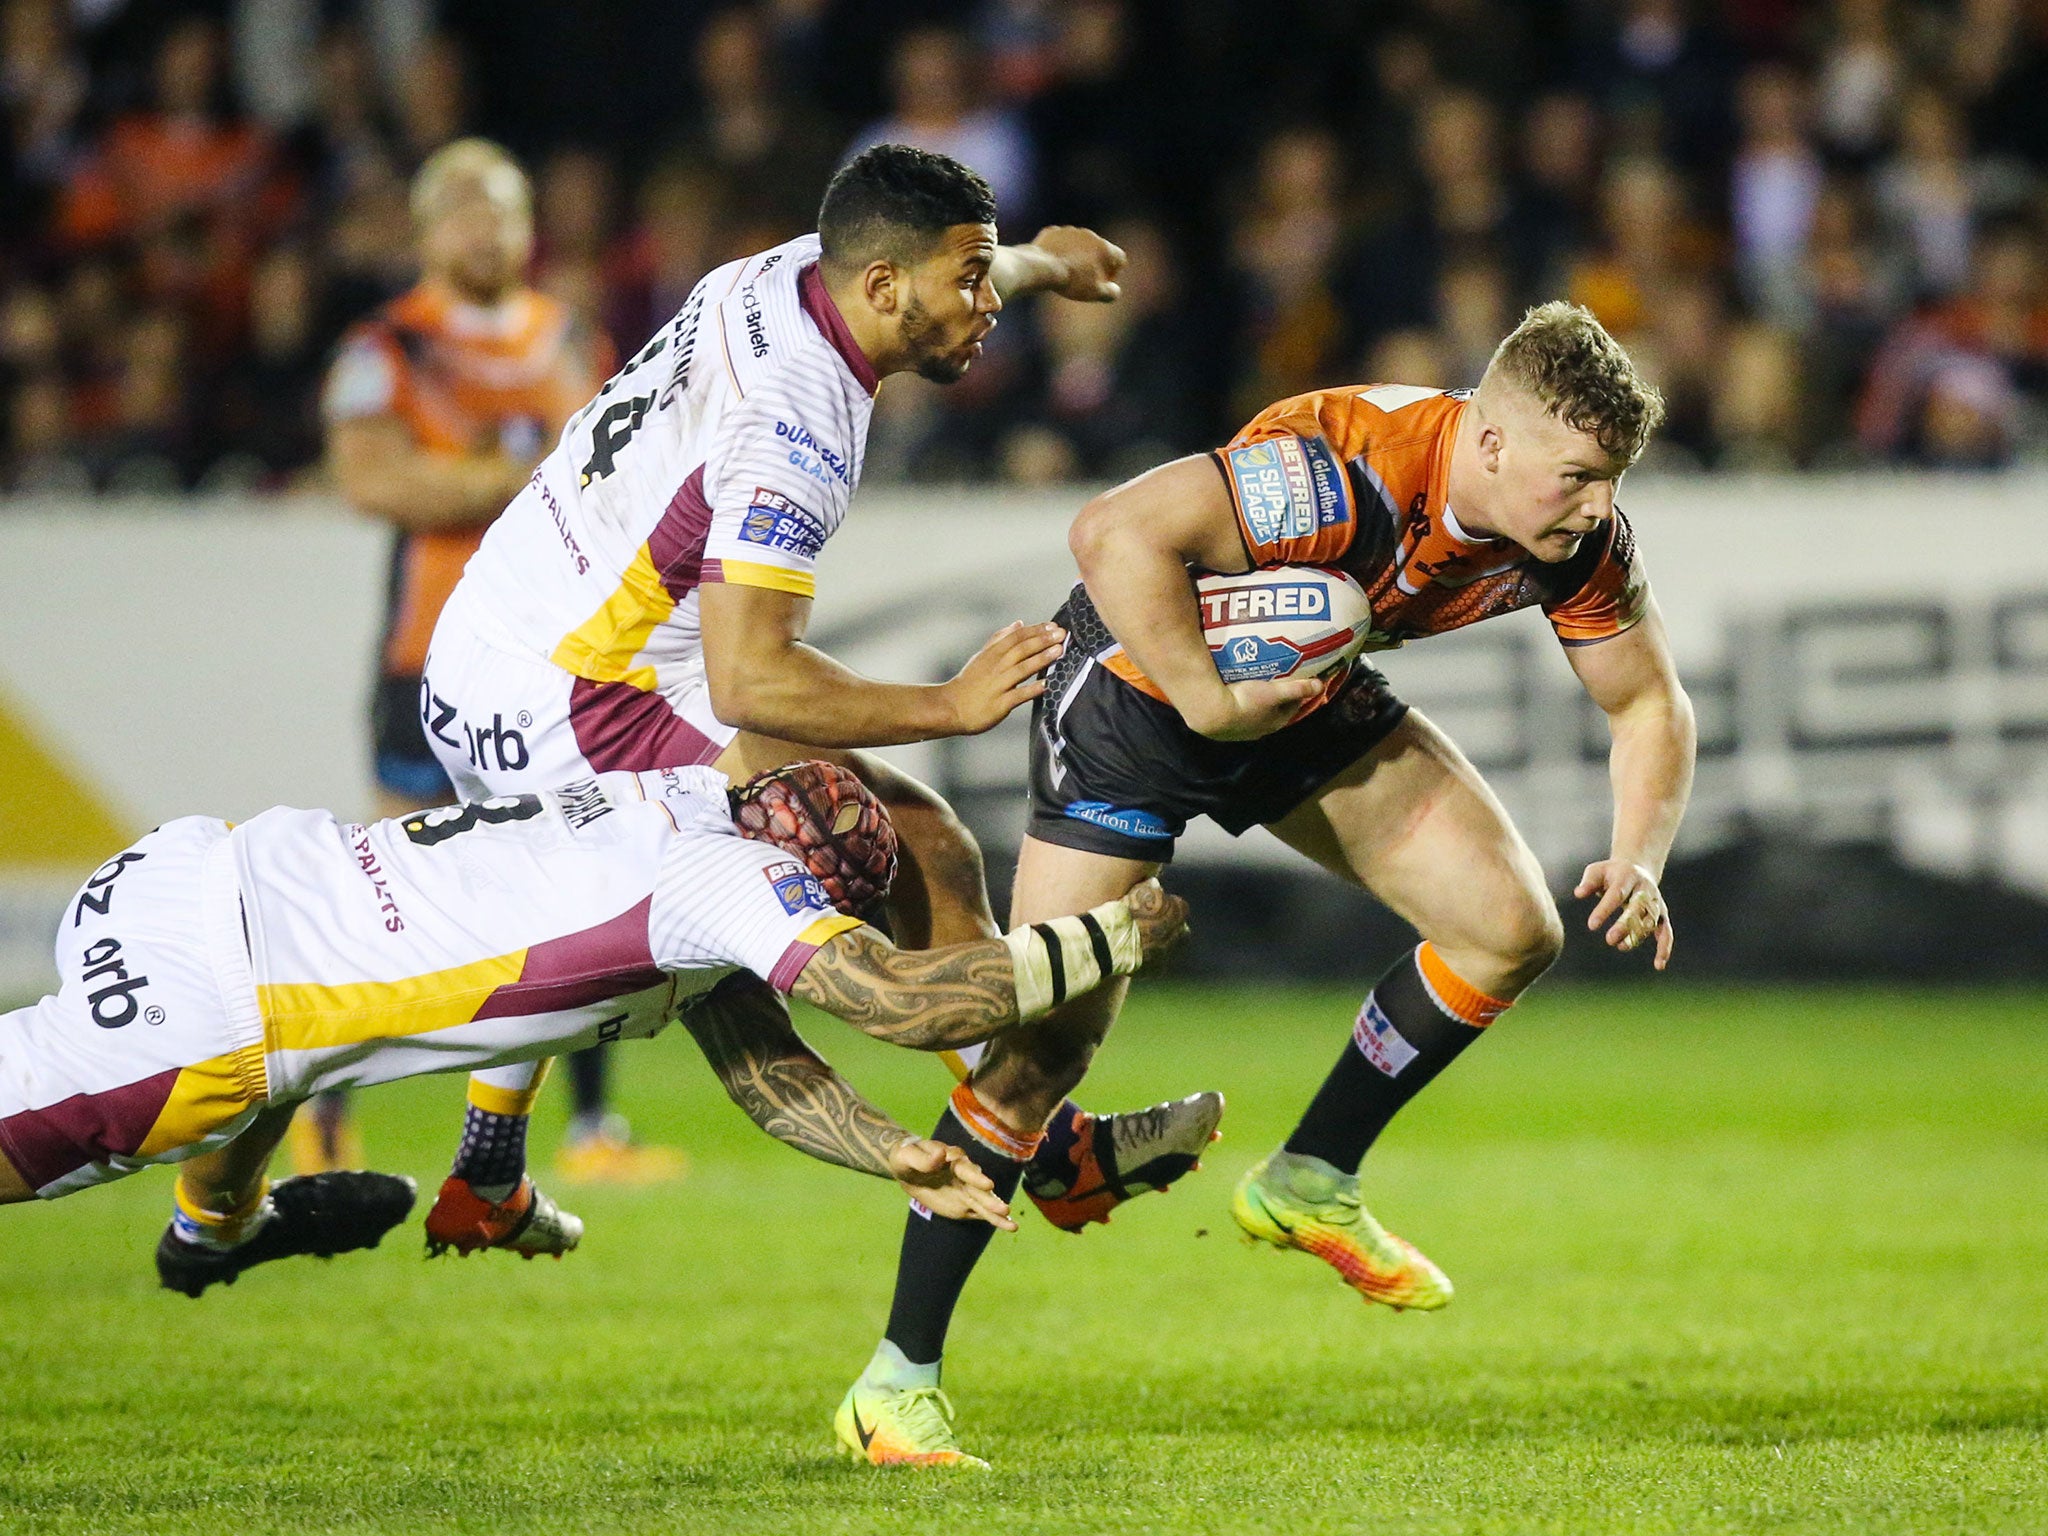 Adam Milner breaks through the Huddersfield line to score a try for Castleford